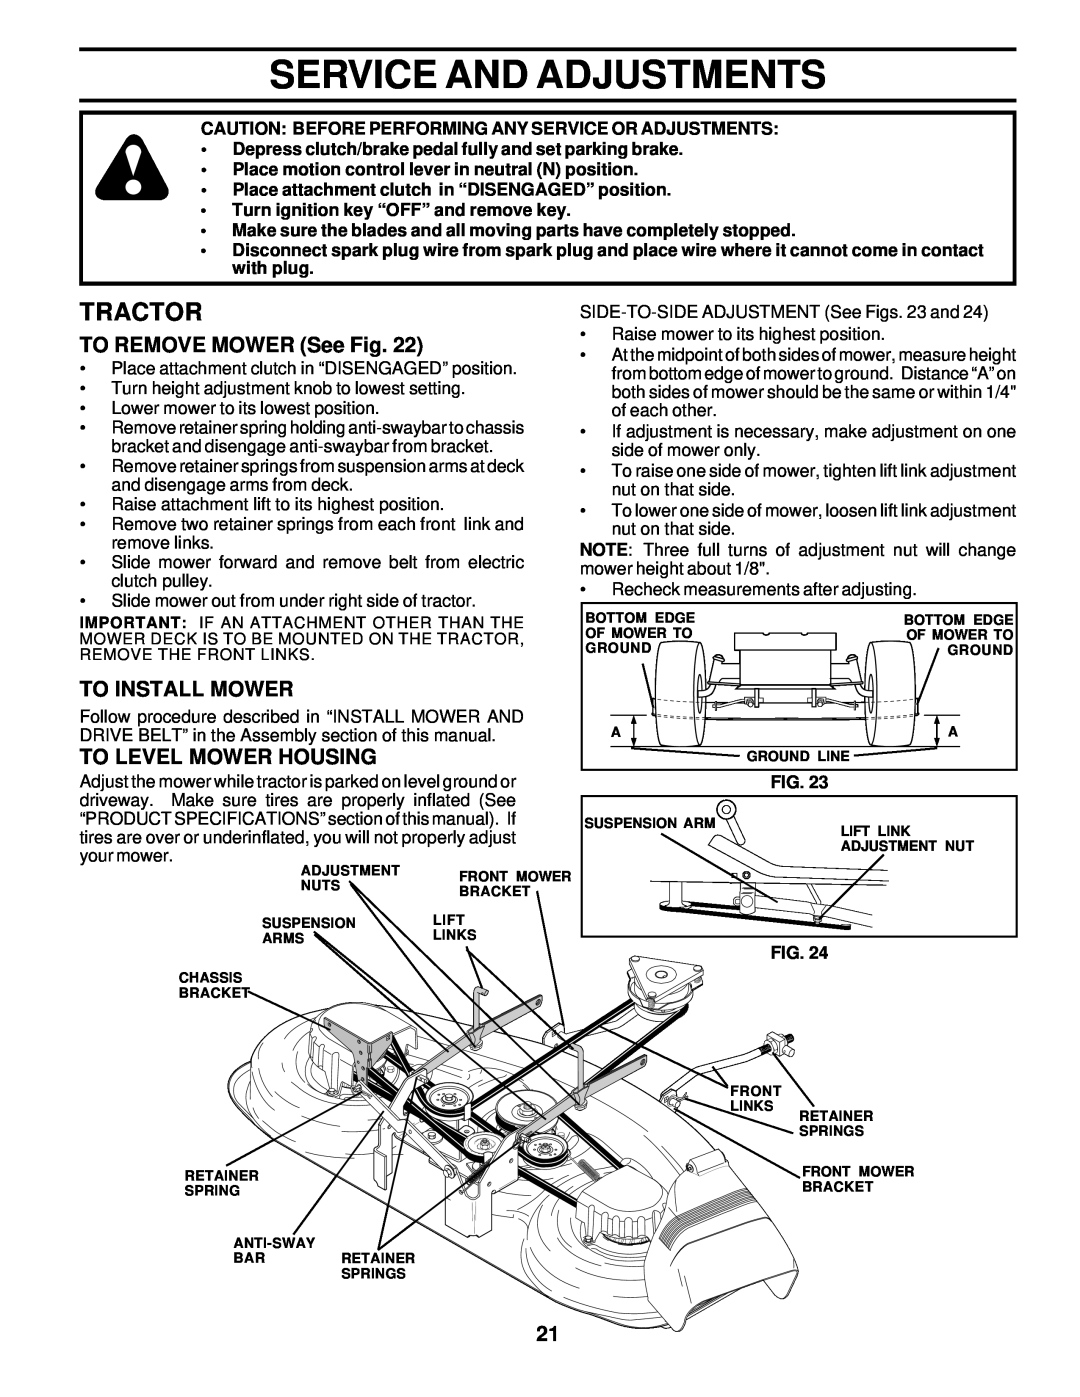 Poulan DPR22H46STB Service And Adjustments, TO REMOVE MOWER See Fig, To Install Mower, To Level Mower Housing, Tractor 